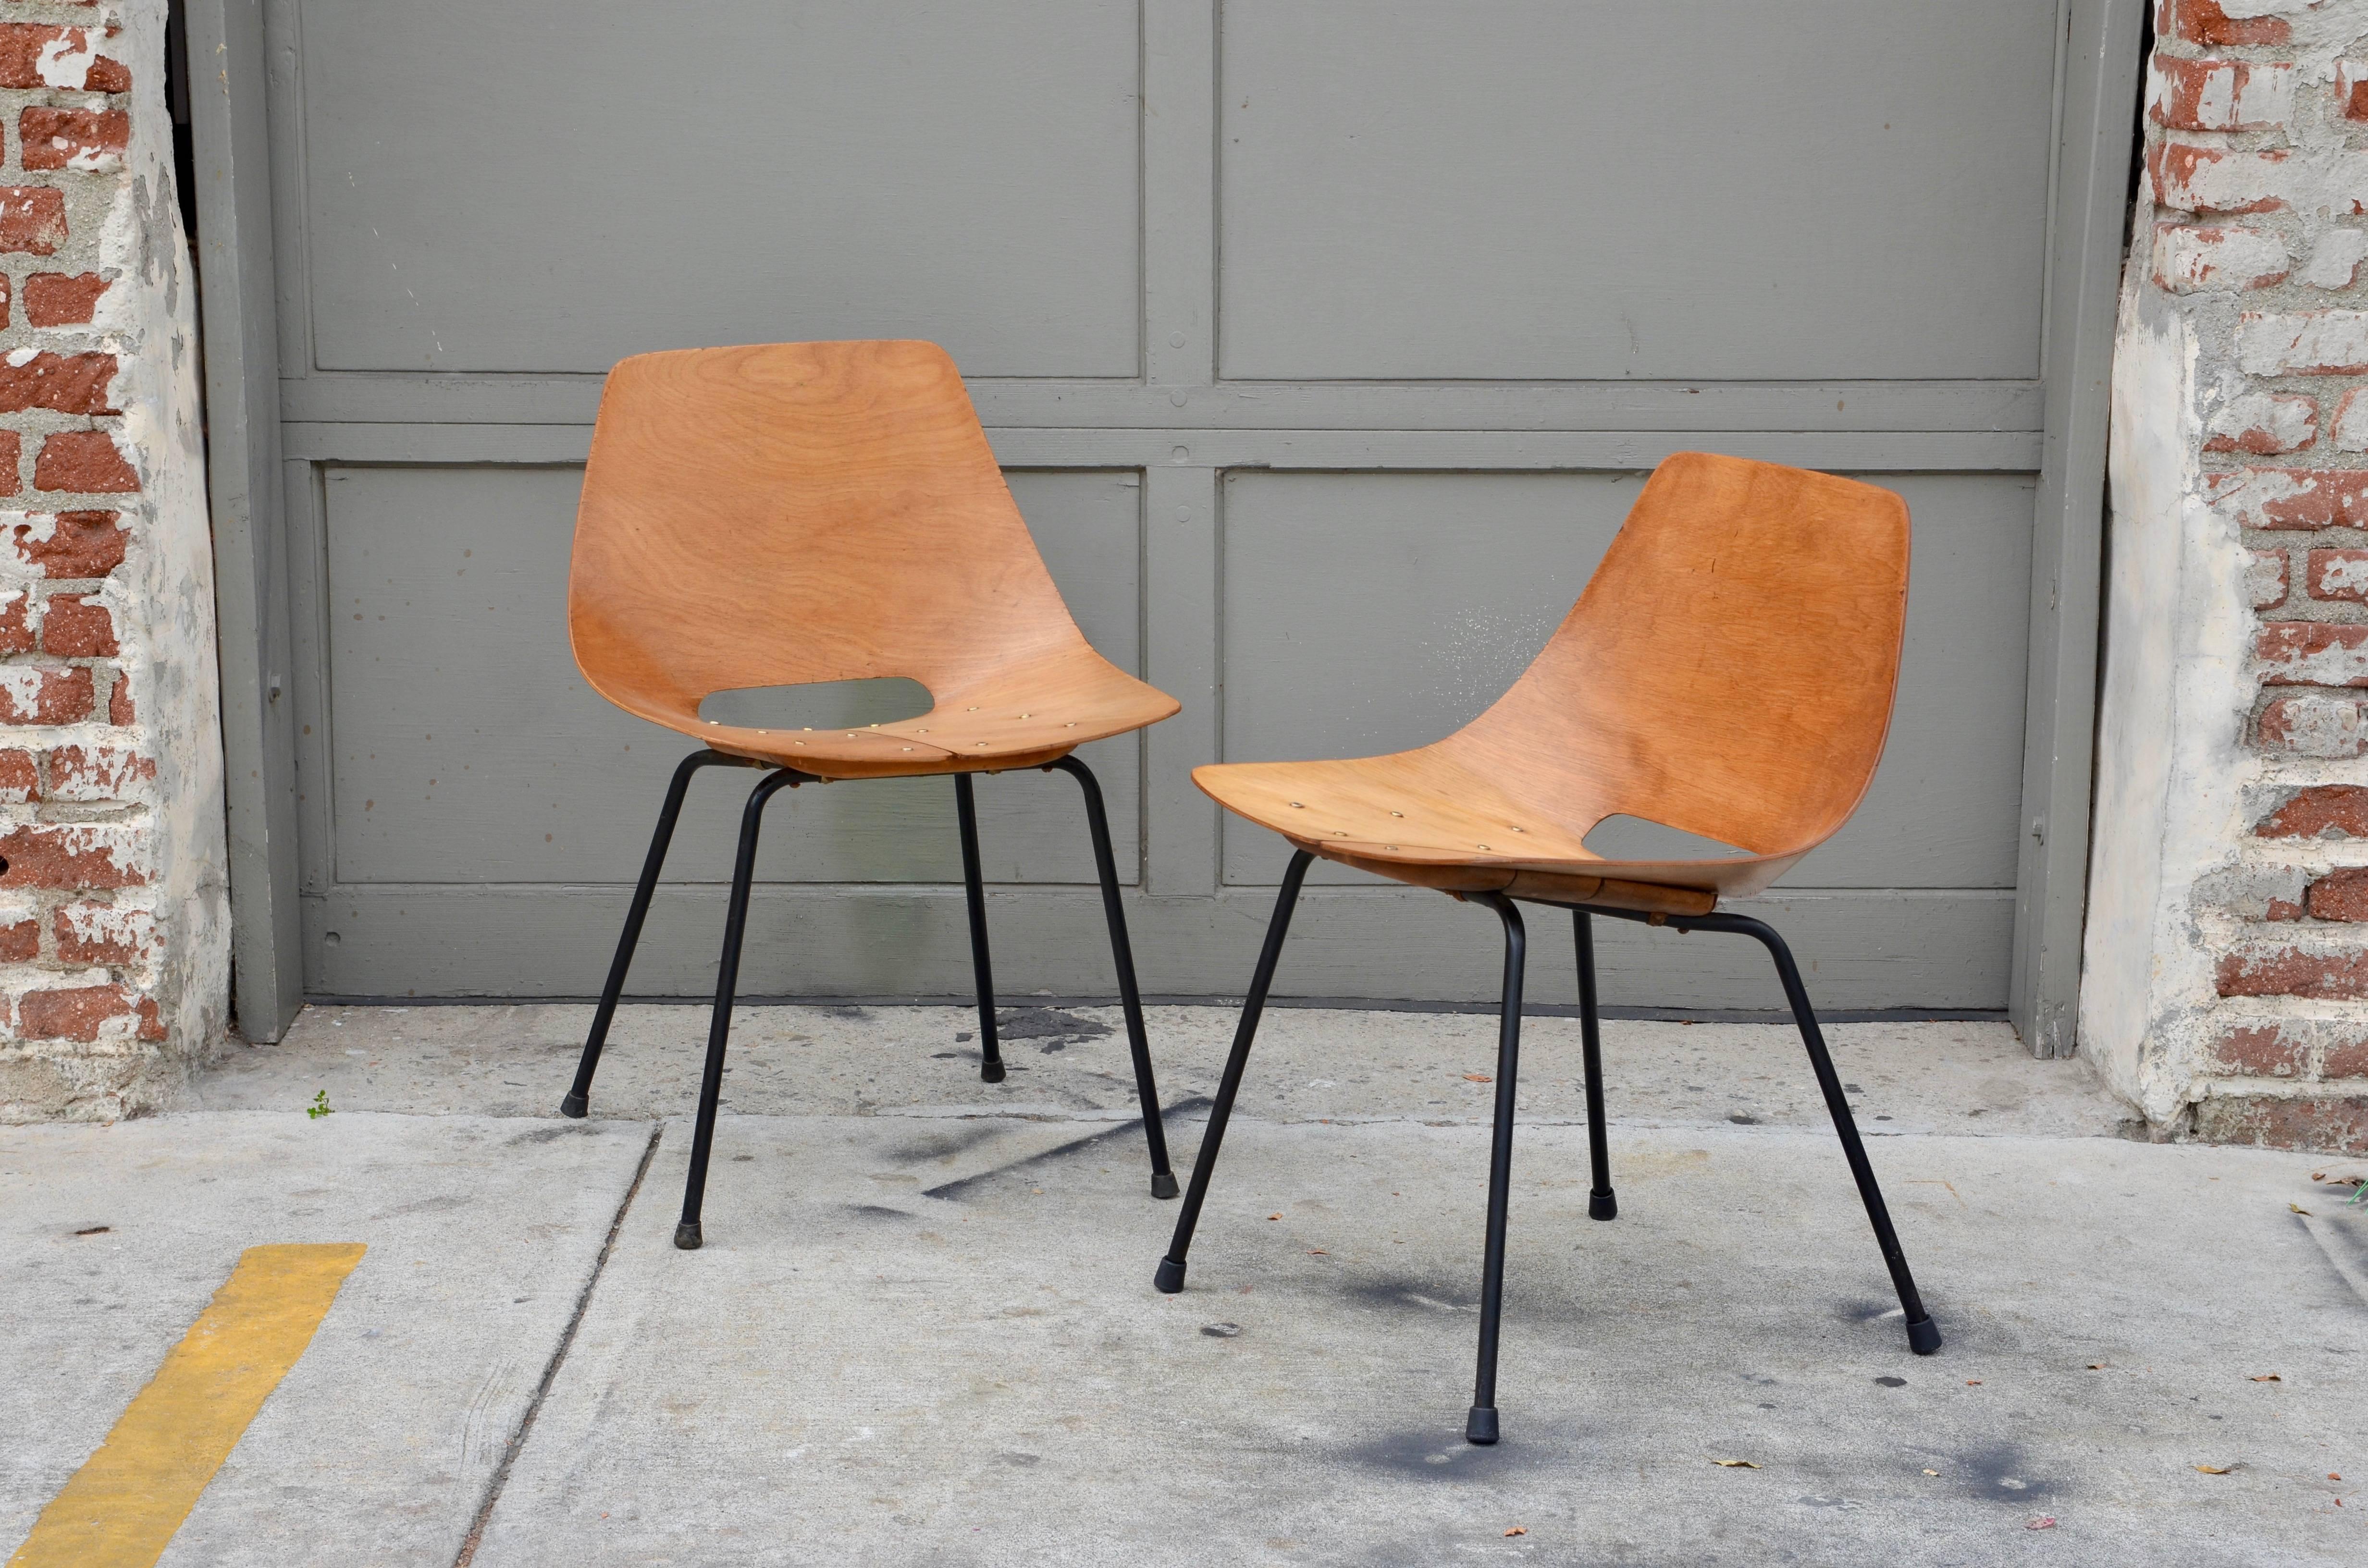 Rare pair of all-original bent plywood Tonneau chairs by Pierre Guariche, l Edition Steiner, 1954.

Early years

Pierre Guariche was born in 1926, son of a family of Parisian goldsmiths. He studied at the École nationale supérieure des arts